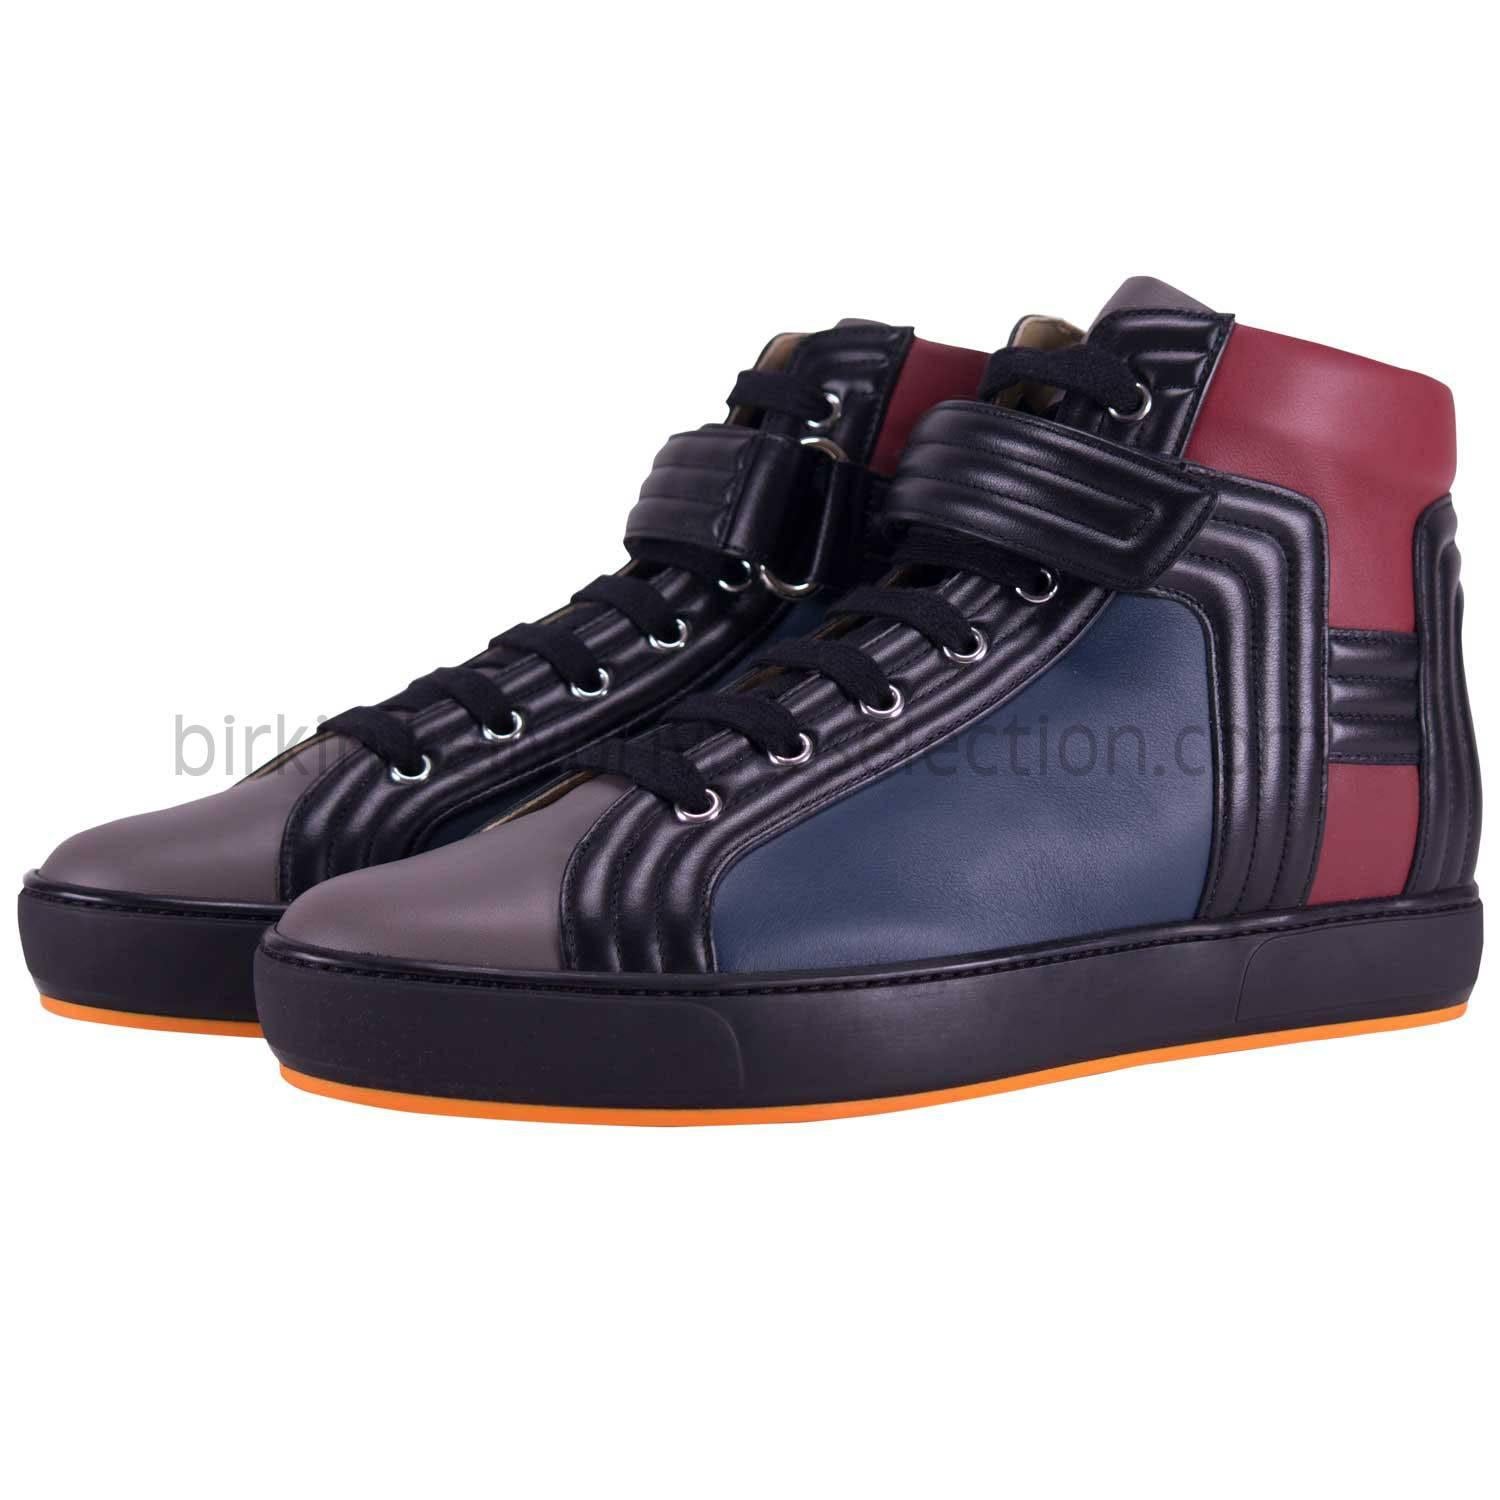 Hermes SPORT HOMME LIONS VEAU 42 Mole Prussia Red Black 2015.

Pre-owned and never used.

Bought it in hermès store in 2015.

Size: 42. 

Model; SPORT HOMME LIONS.

Color: TAUPE/PRUSSE/ROUGE/NOIR.

-Original Invoice.

-Shipment and